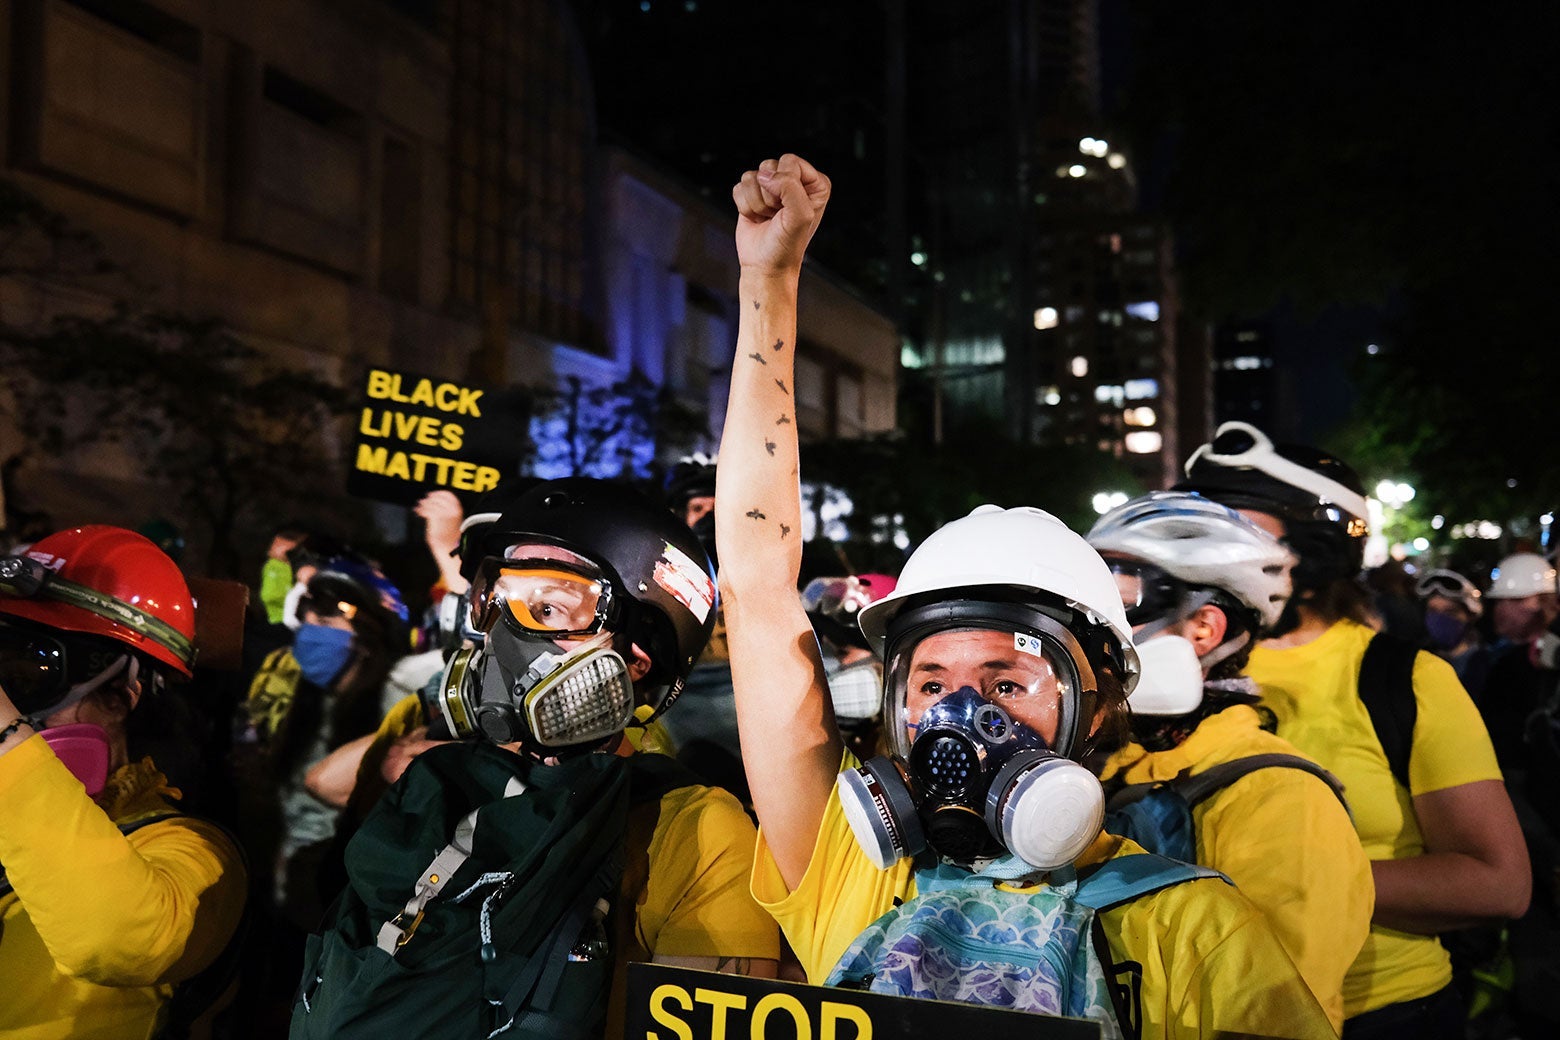 A protester wearing a mask and helmet holds up a fist amid a crowd of others.